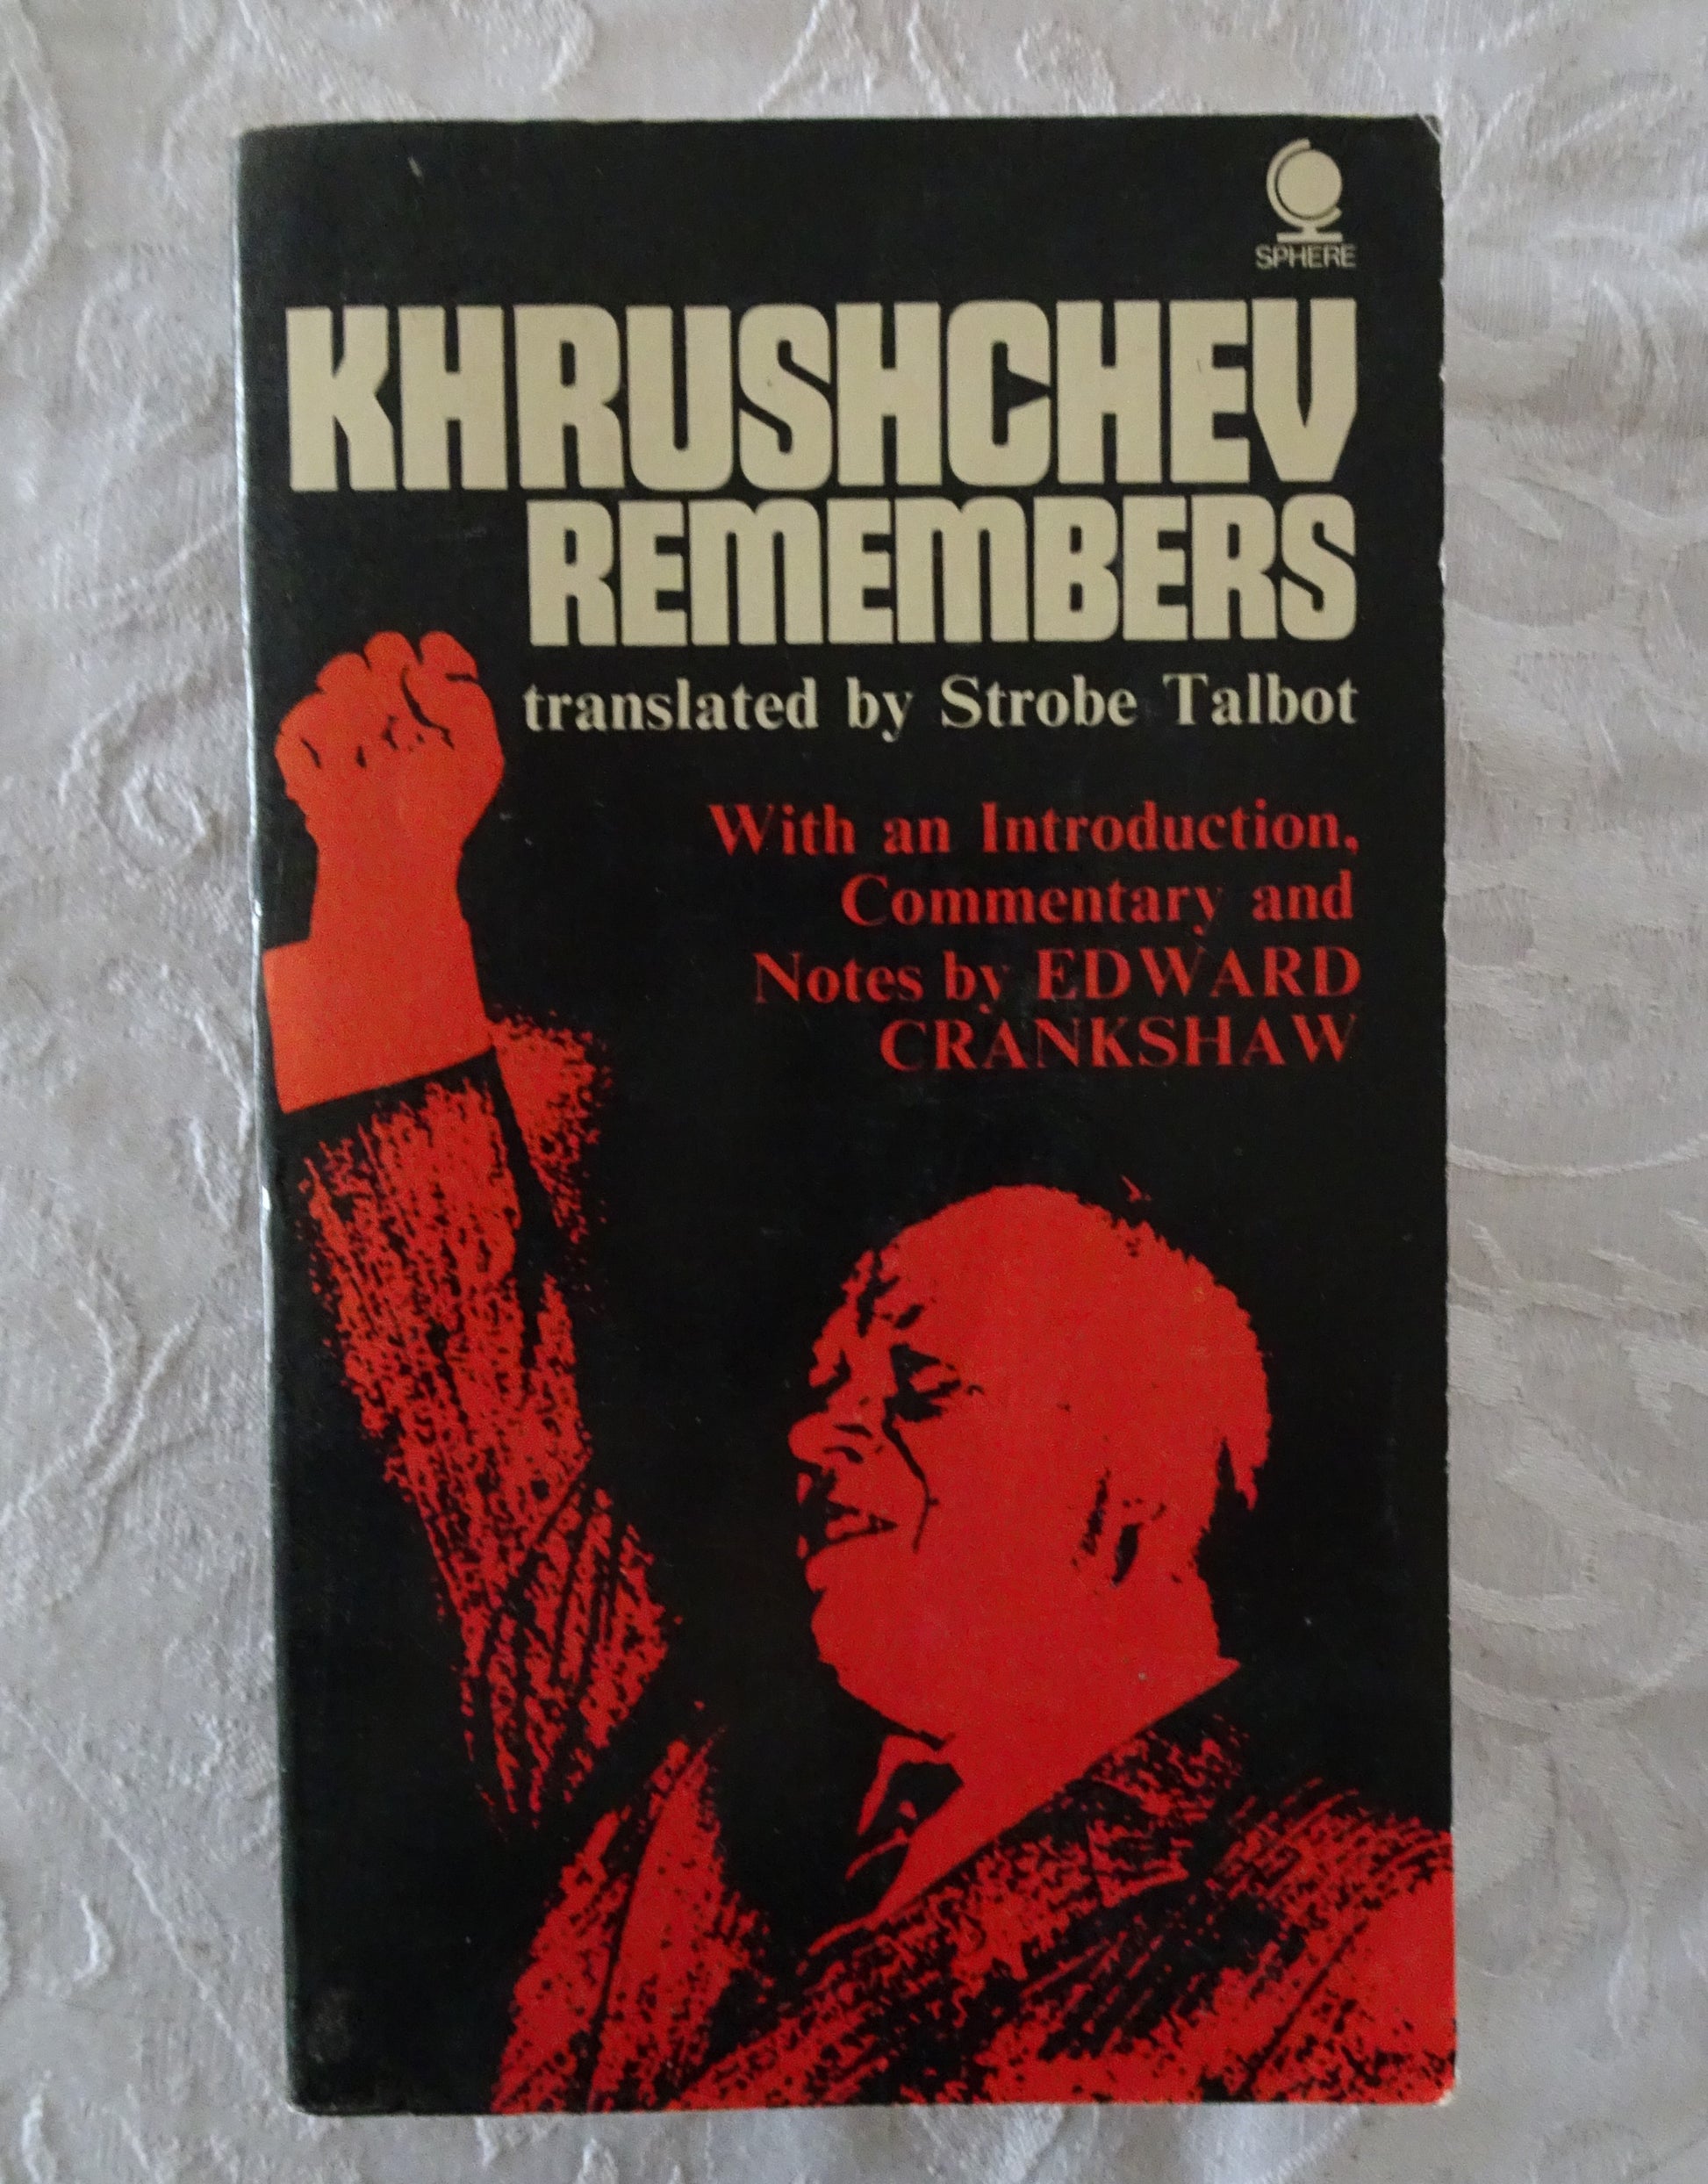 Khrushchev Remembers  With an Introduction, Commentary and Notes by Edward Crankshaw  Translated by Strobe Talbot